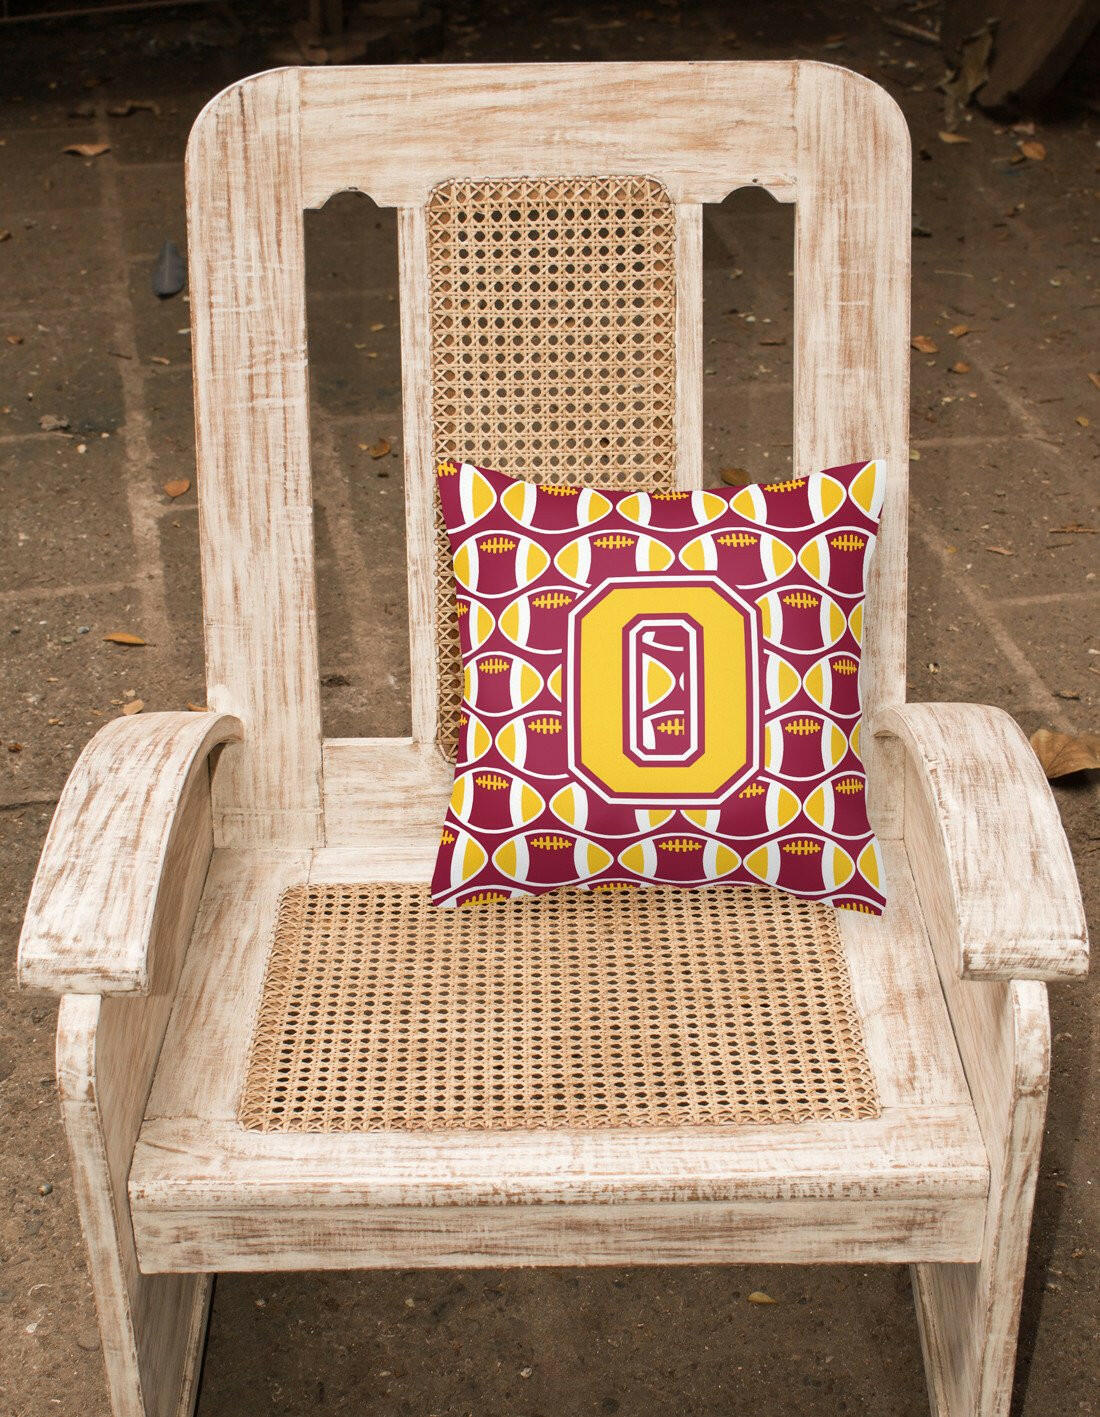 Letter O Football Maroon and Gold Fabric Decorative Pillow CJ1081-OPW1414 by Caroline's Treasures